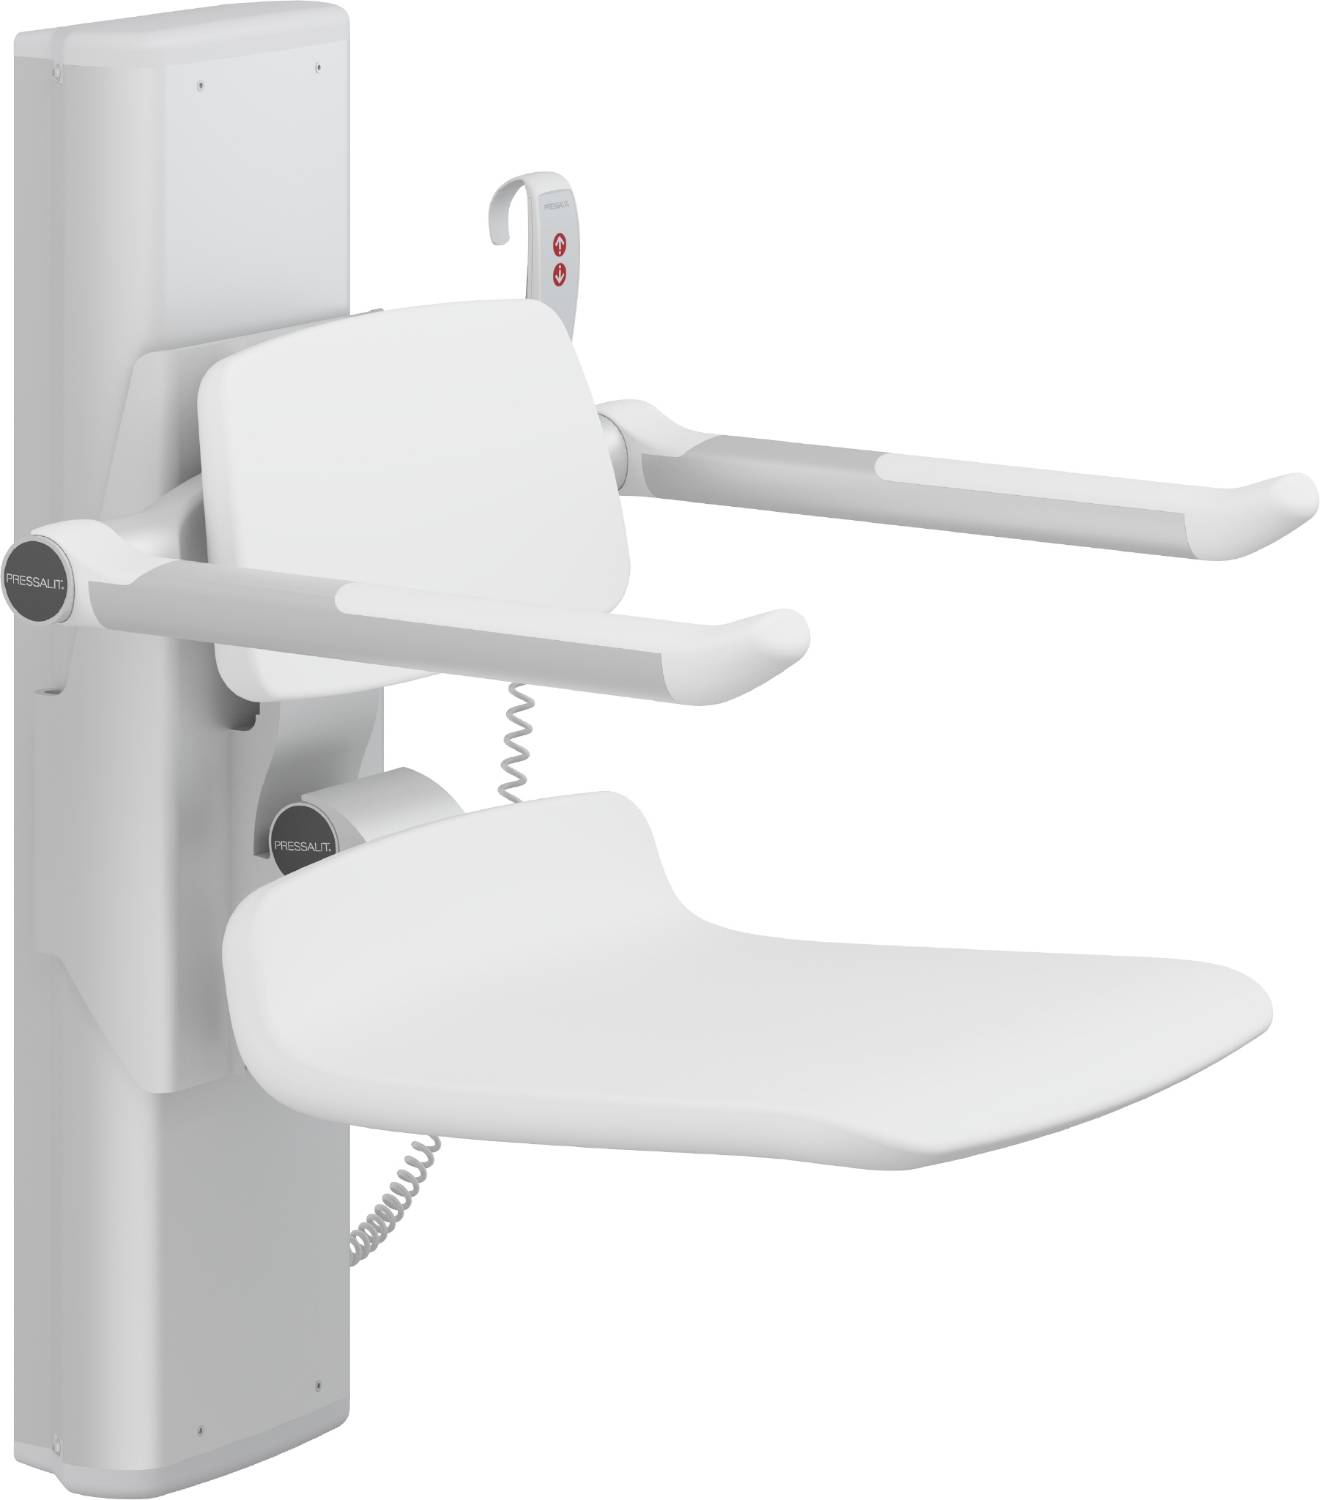 Shower seat PLUS 450 height adjustable powered - R7634